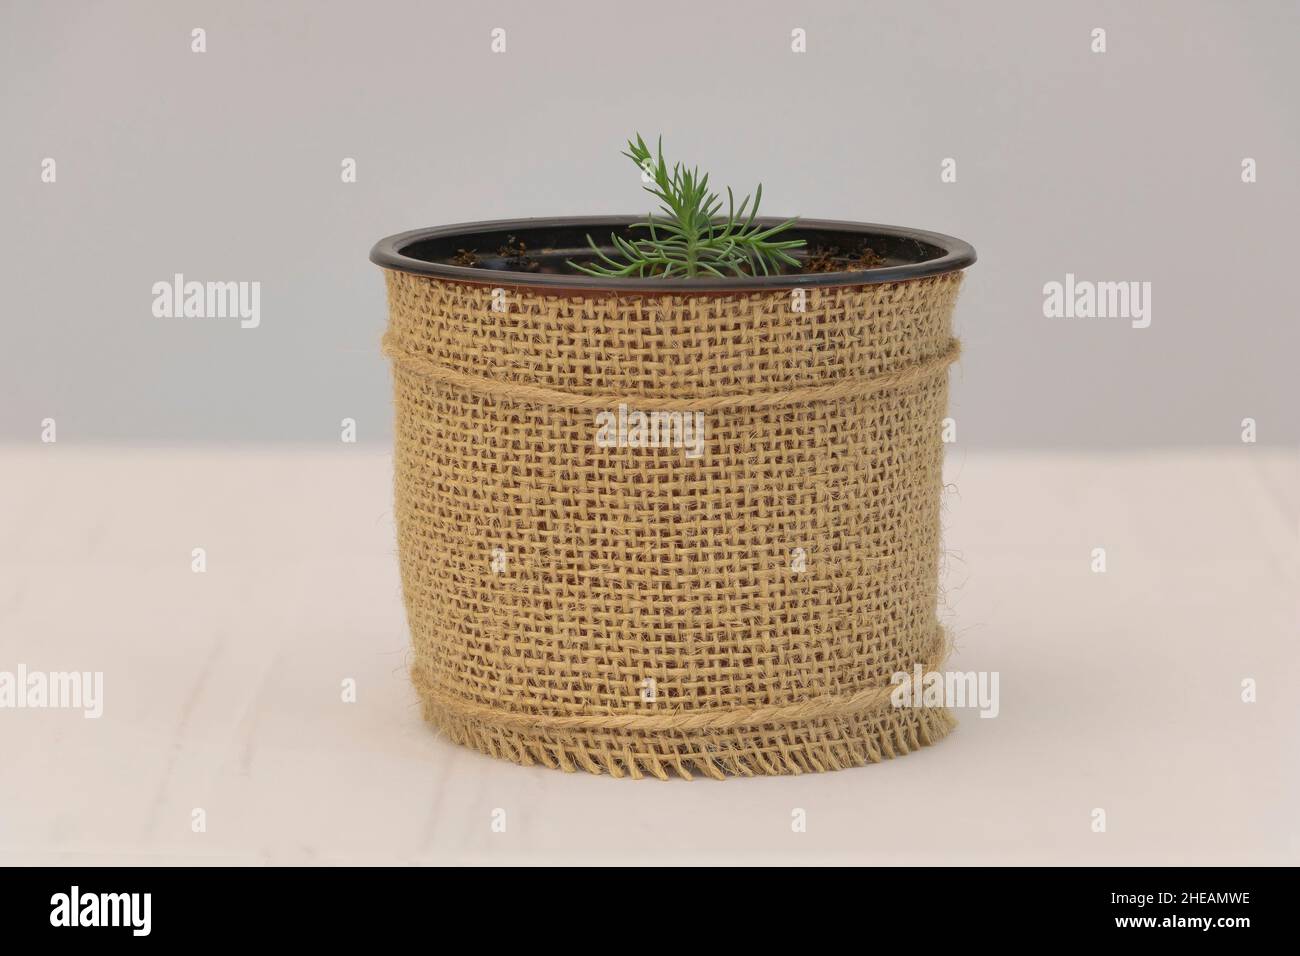 A young Sequoia tree in the small pot which was grow from seed. Concept for growing Sequoia tree. Stock Photo